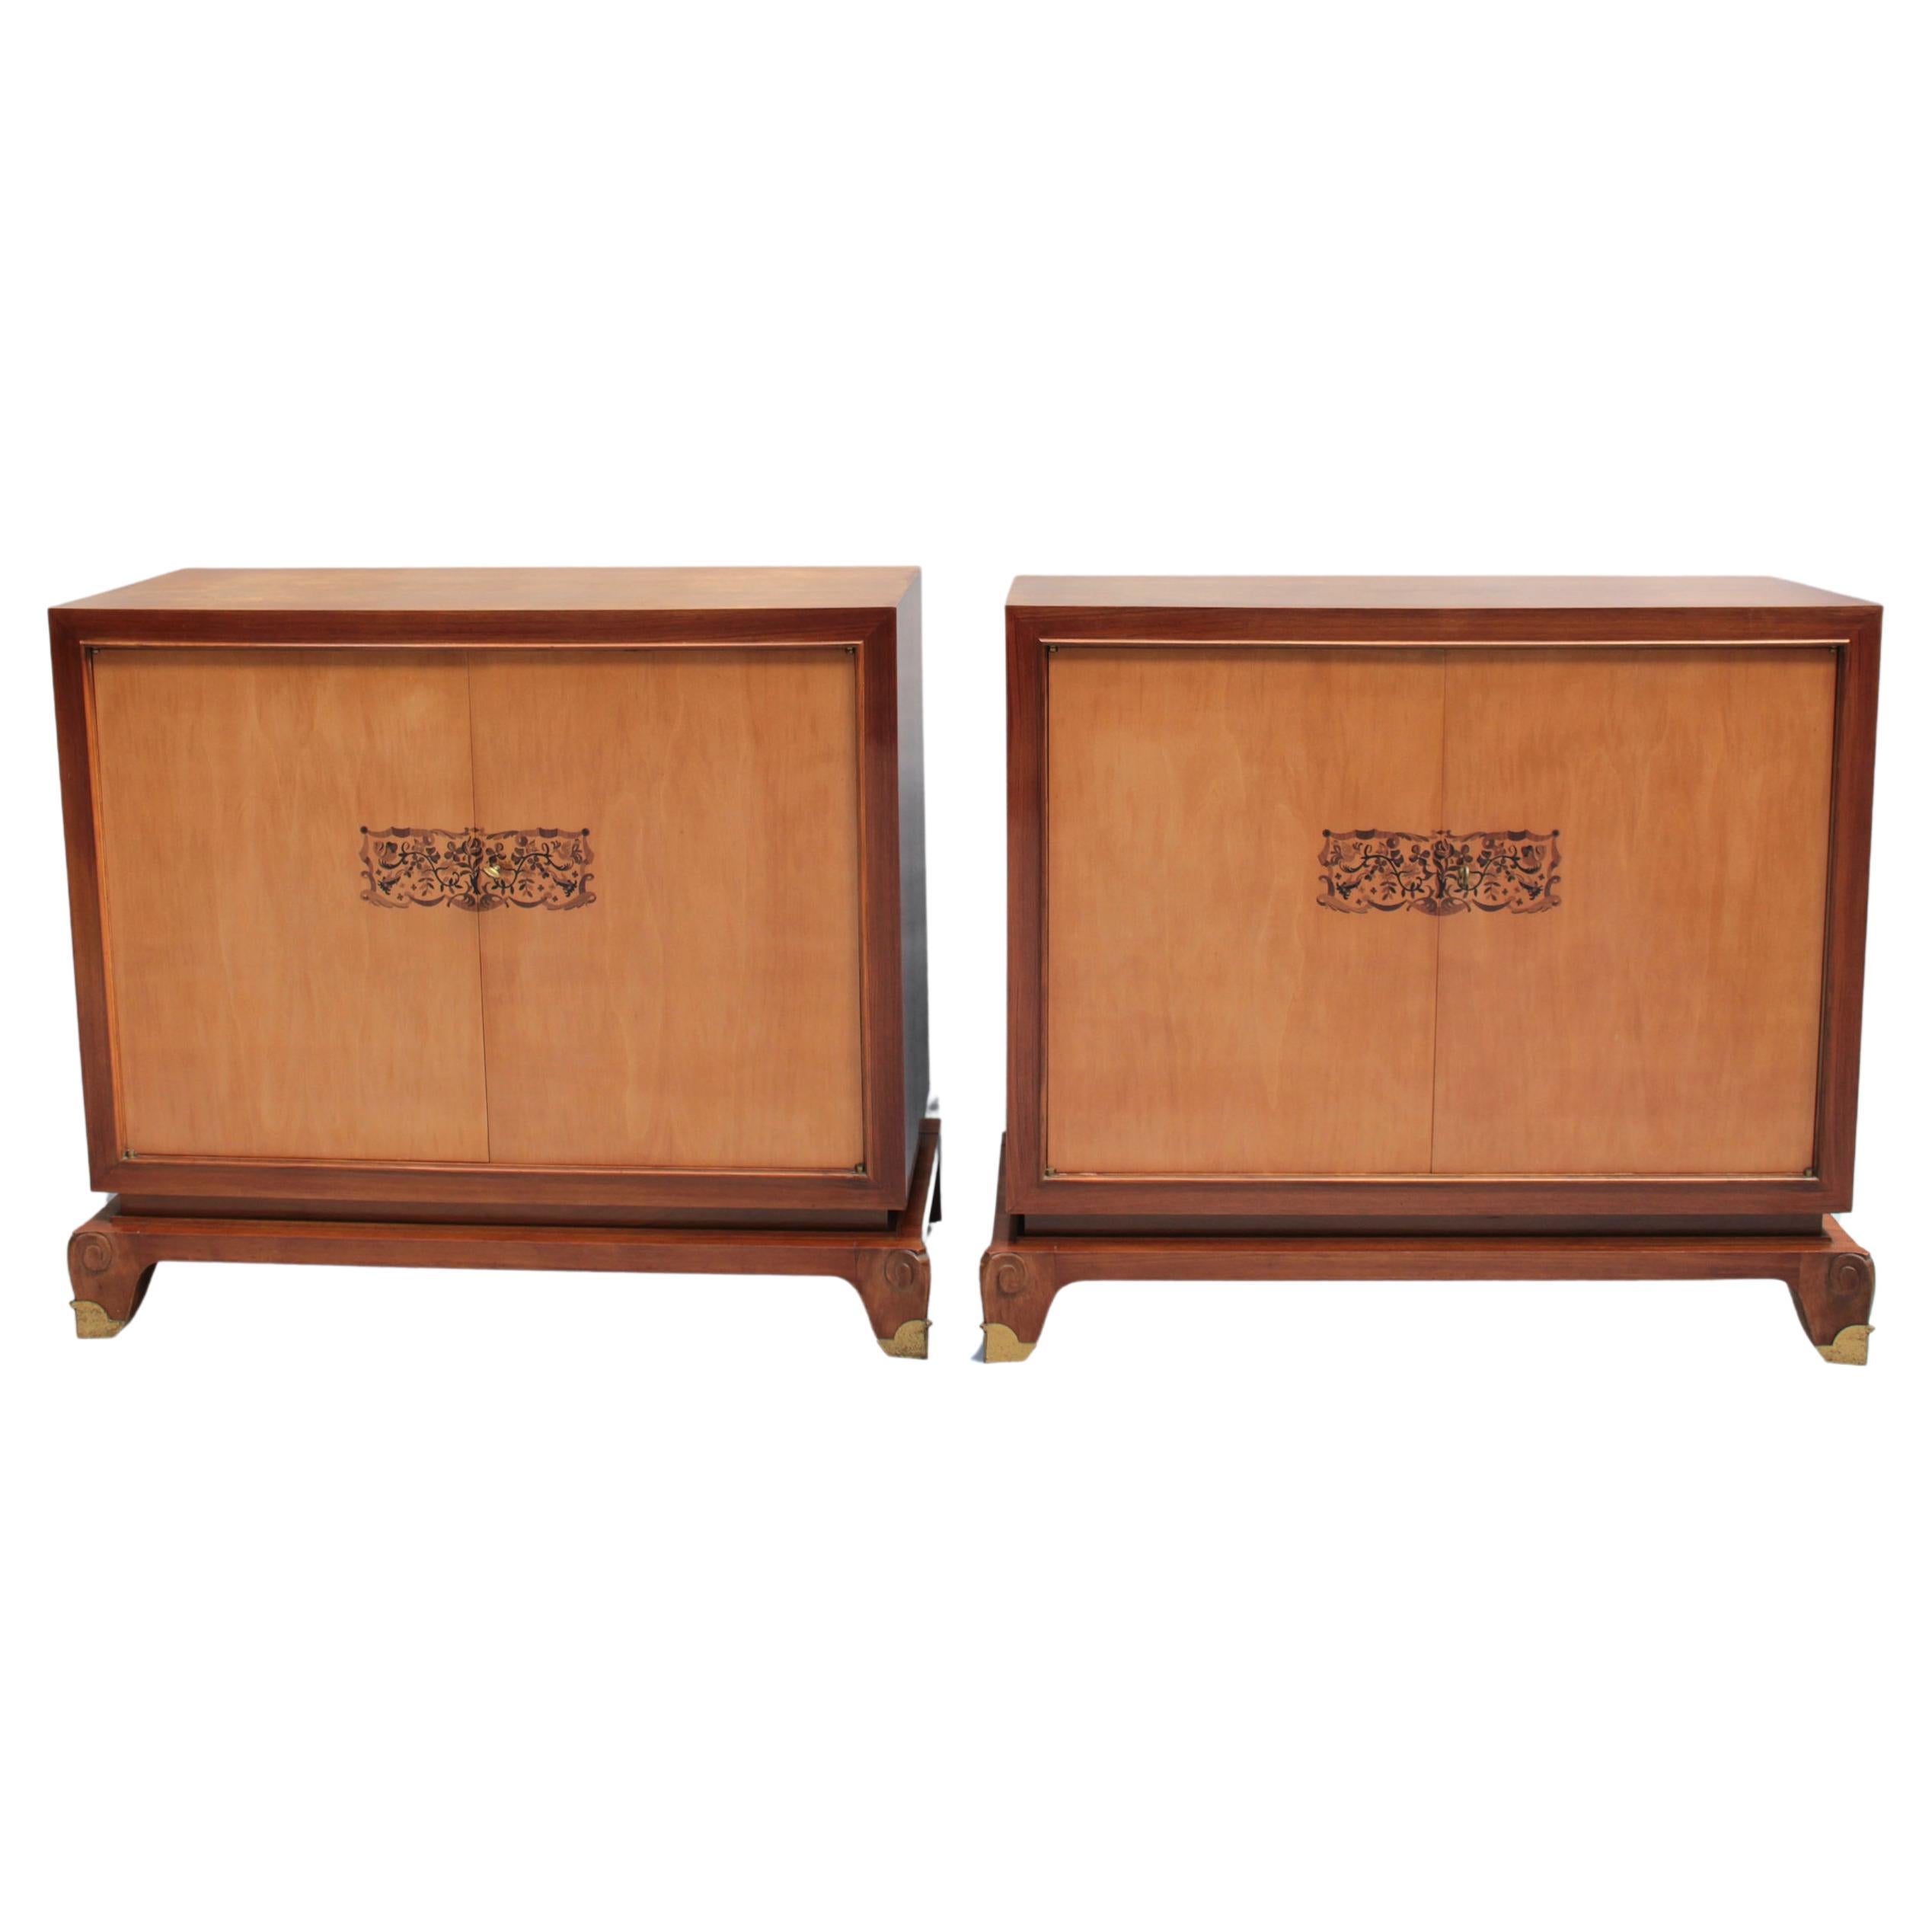 A Pair of Fine French Art Deco Rosewood Cabinets/Commodes by Jean Pascaud For Sale